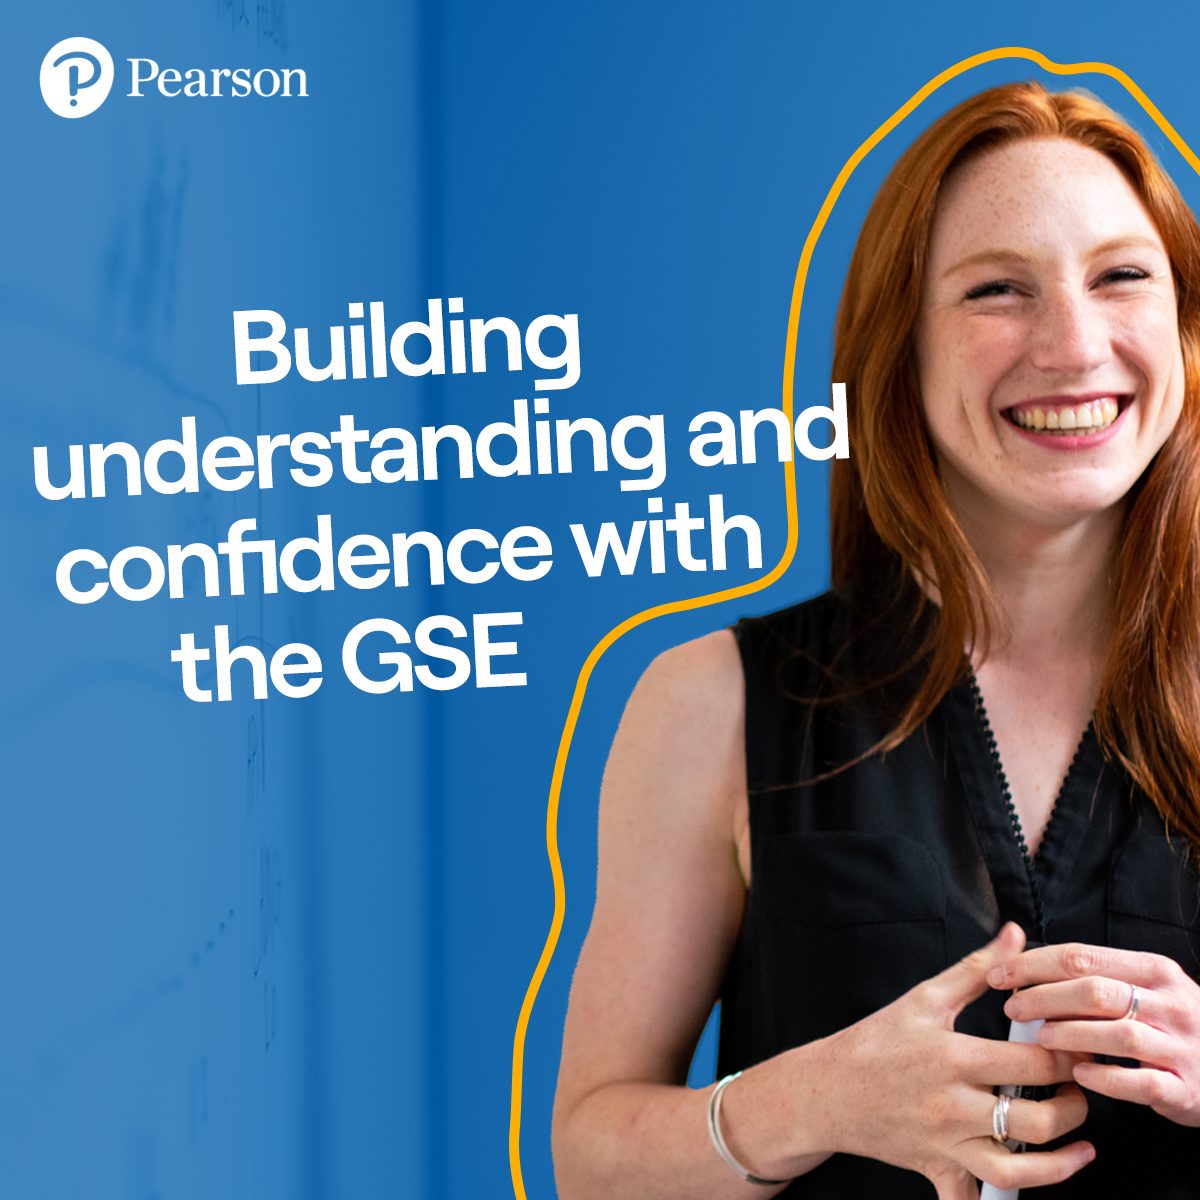 Building understanding and confidence with the GSE